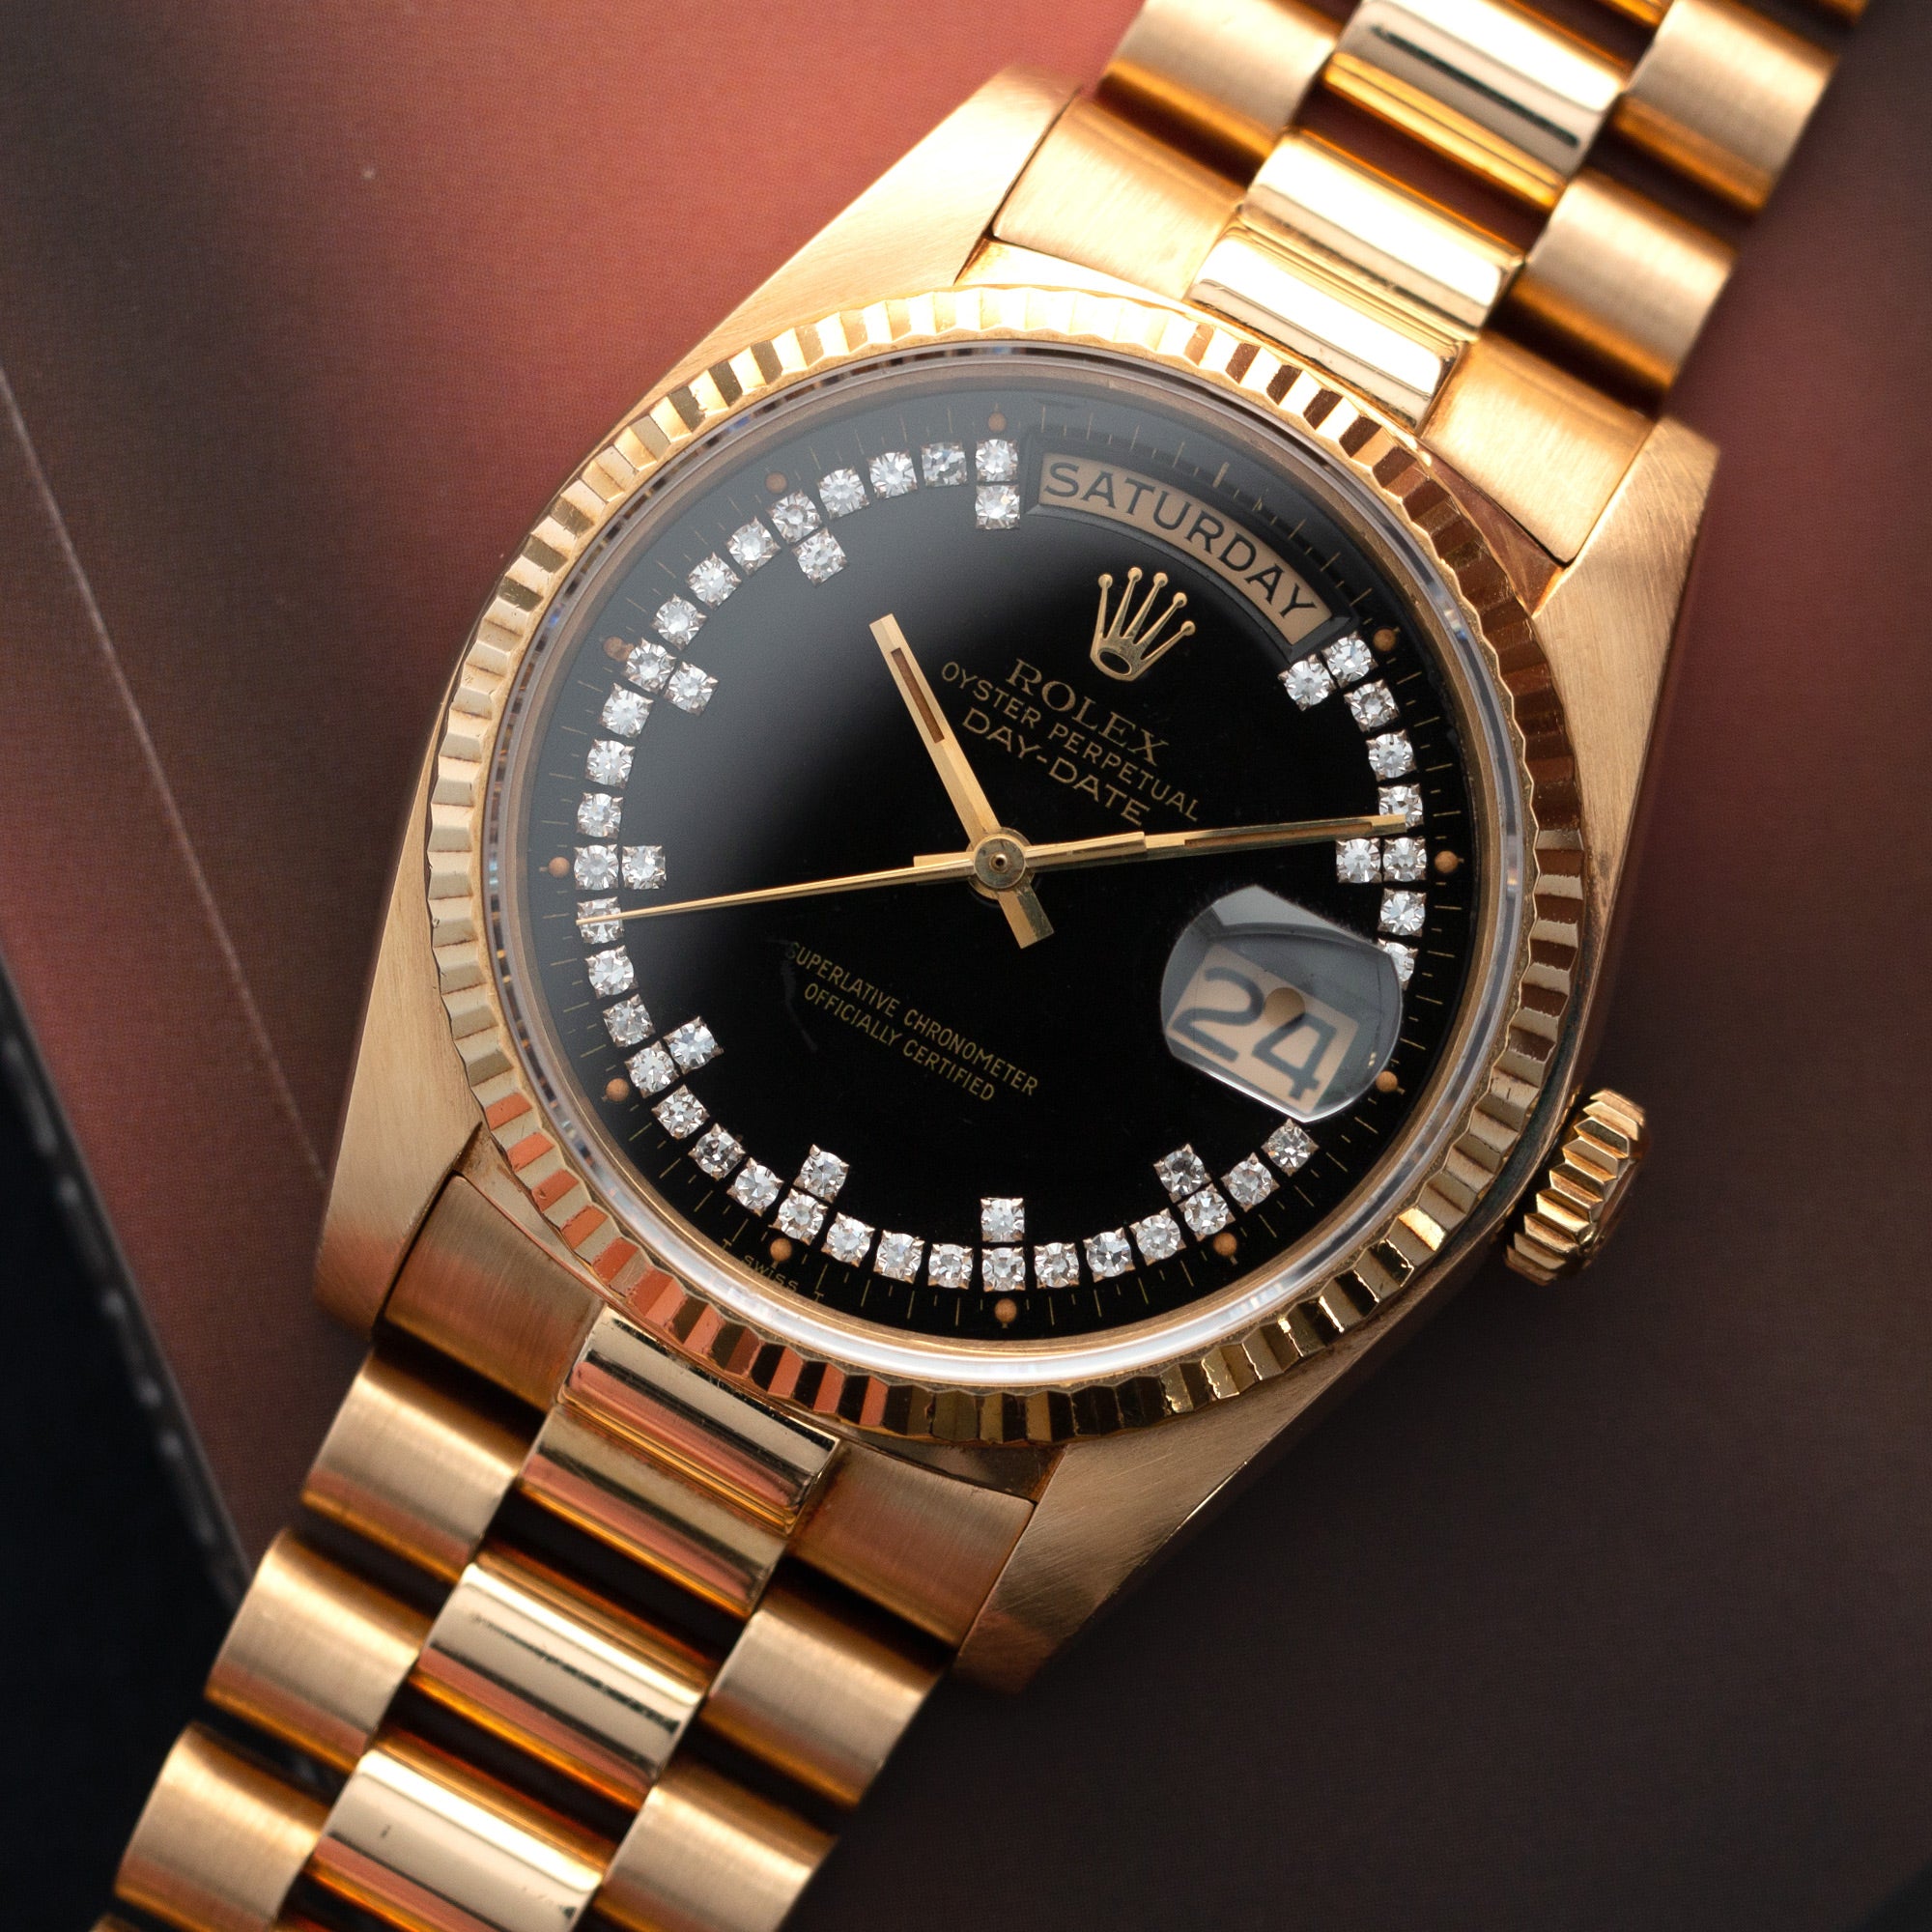 Rolex - Rolex Yellow Gold Day-Date Ref. 18038 with Black, Diamond String Dial - The Keystone Watches